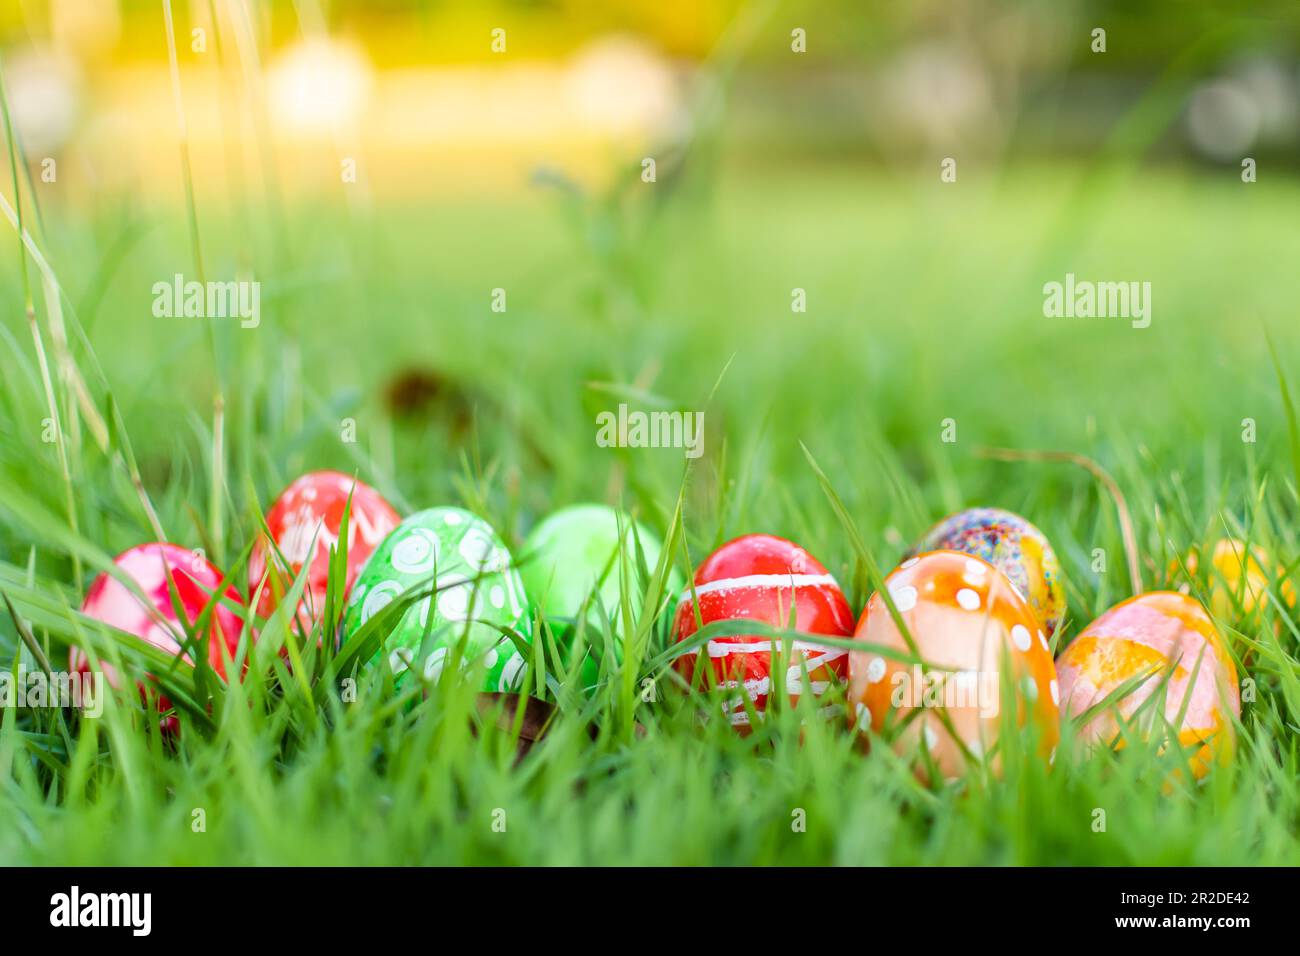 Abstract Defocused Easter, Closeup, many beautiful painted eggs as grass blurred background. concept for good friday, easter monday. copy space on top Stock Photo